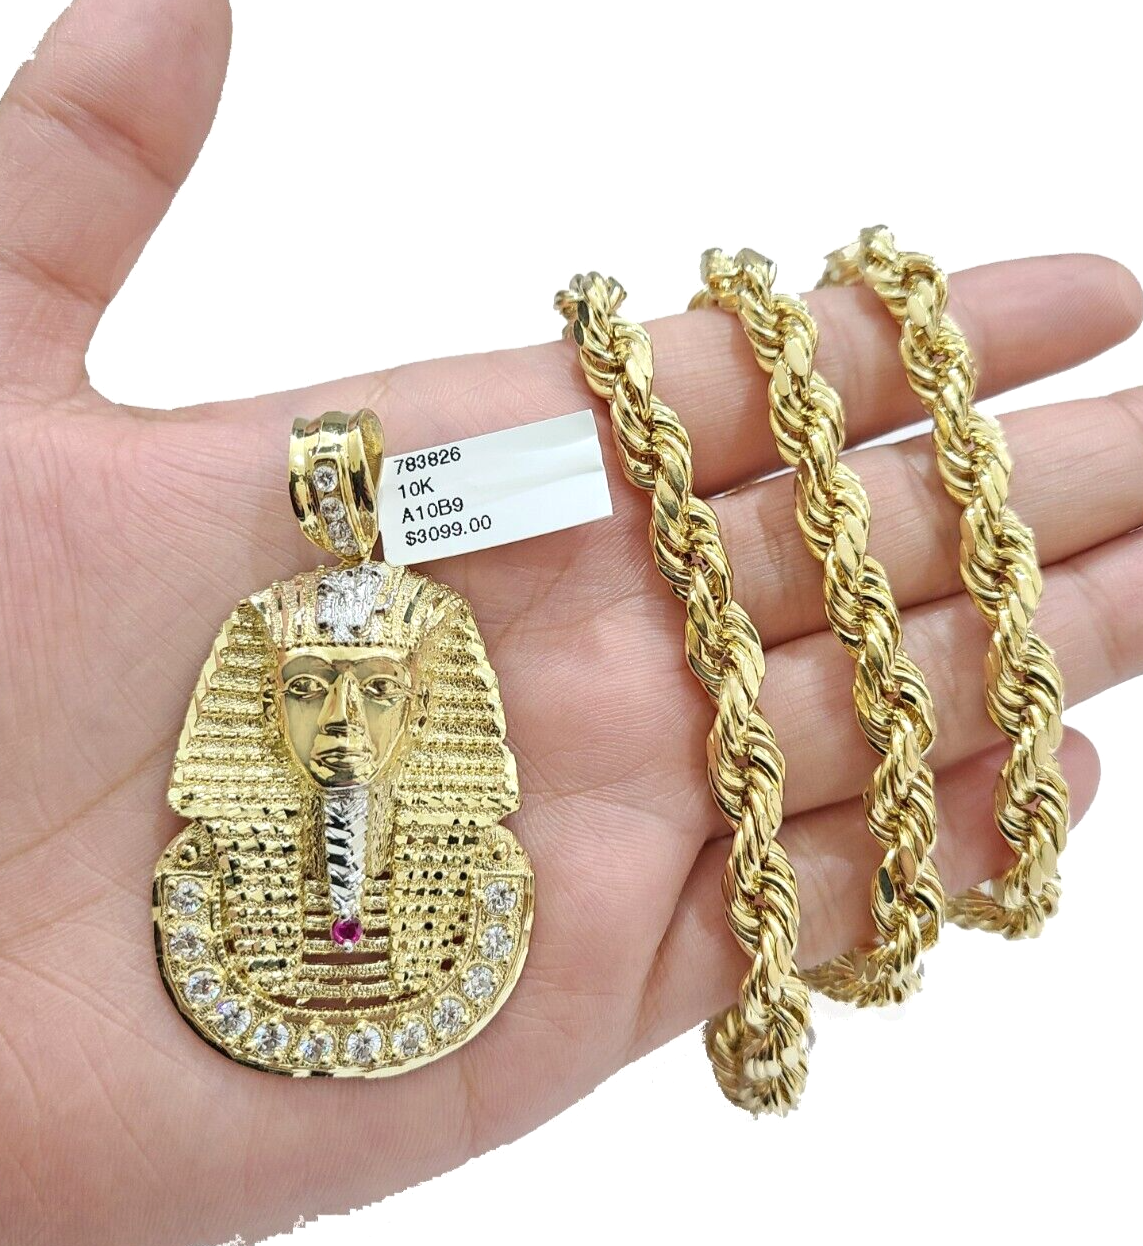 10k Gold Pharaoh Head Charm Rope Chain Necklace 8mm 28'' Set & Pendant 10kt  REAL